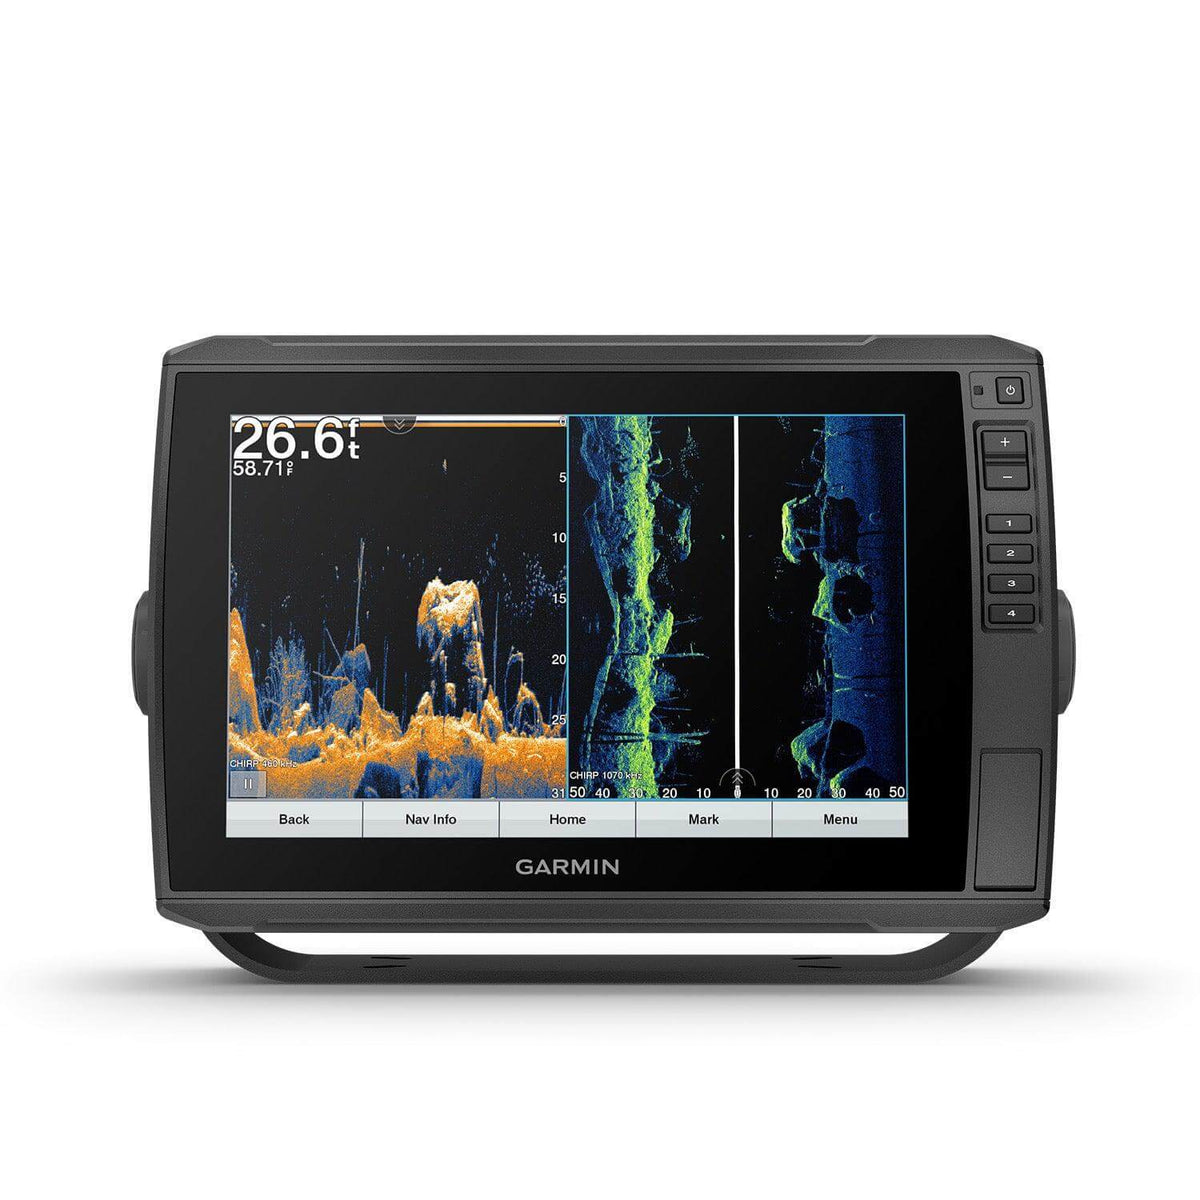 NEW 65 FT 7 IN DVR FISH FINDER CAMERA SM110MD20 – Uncle Wiener's